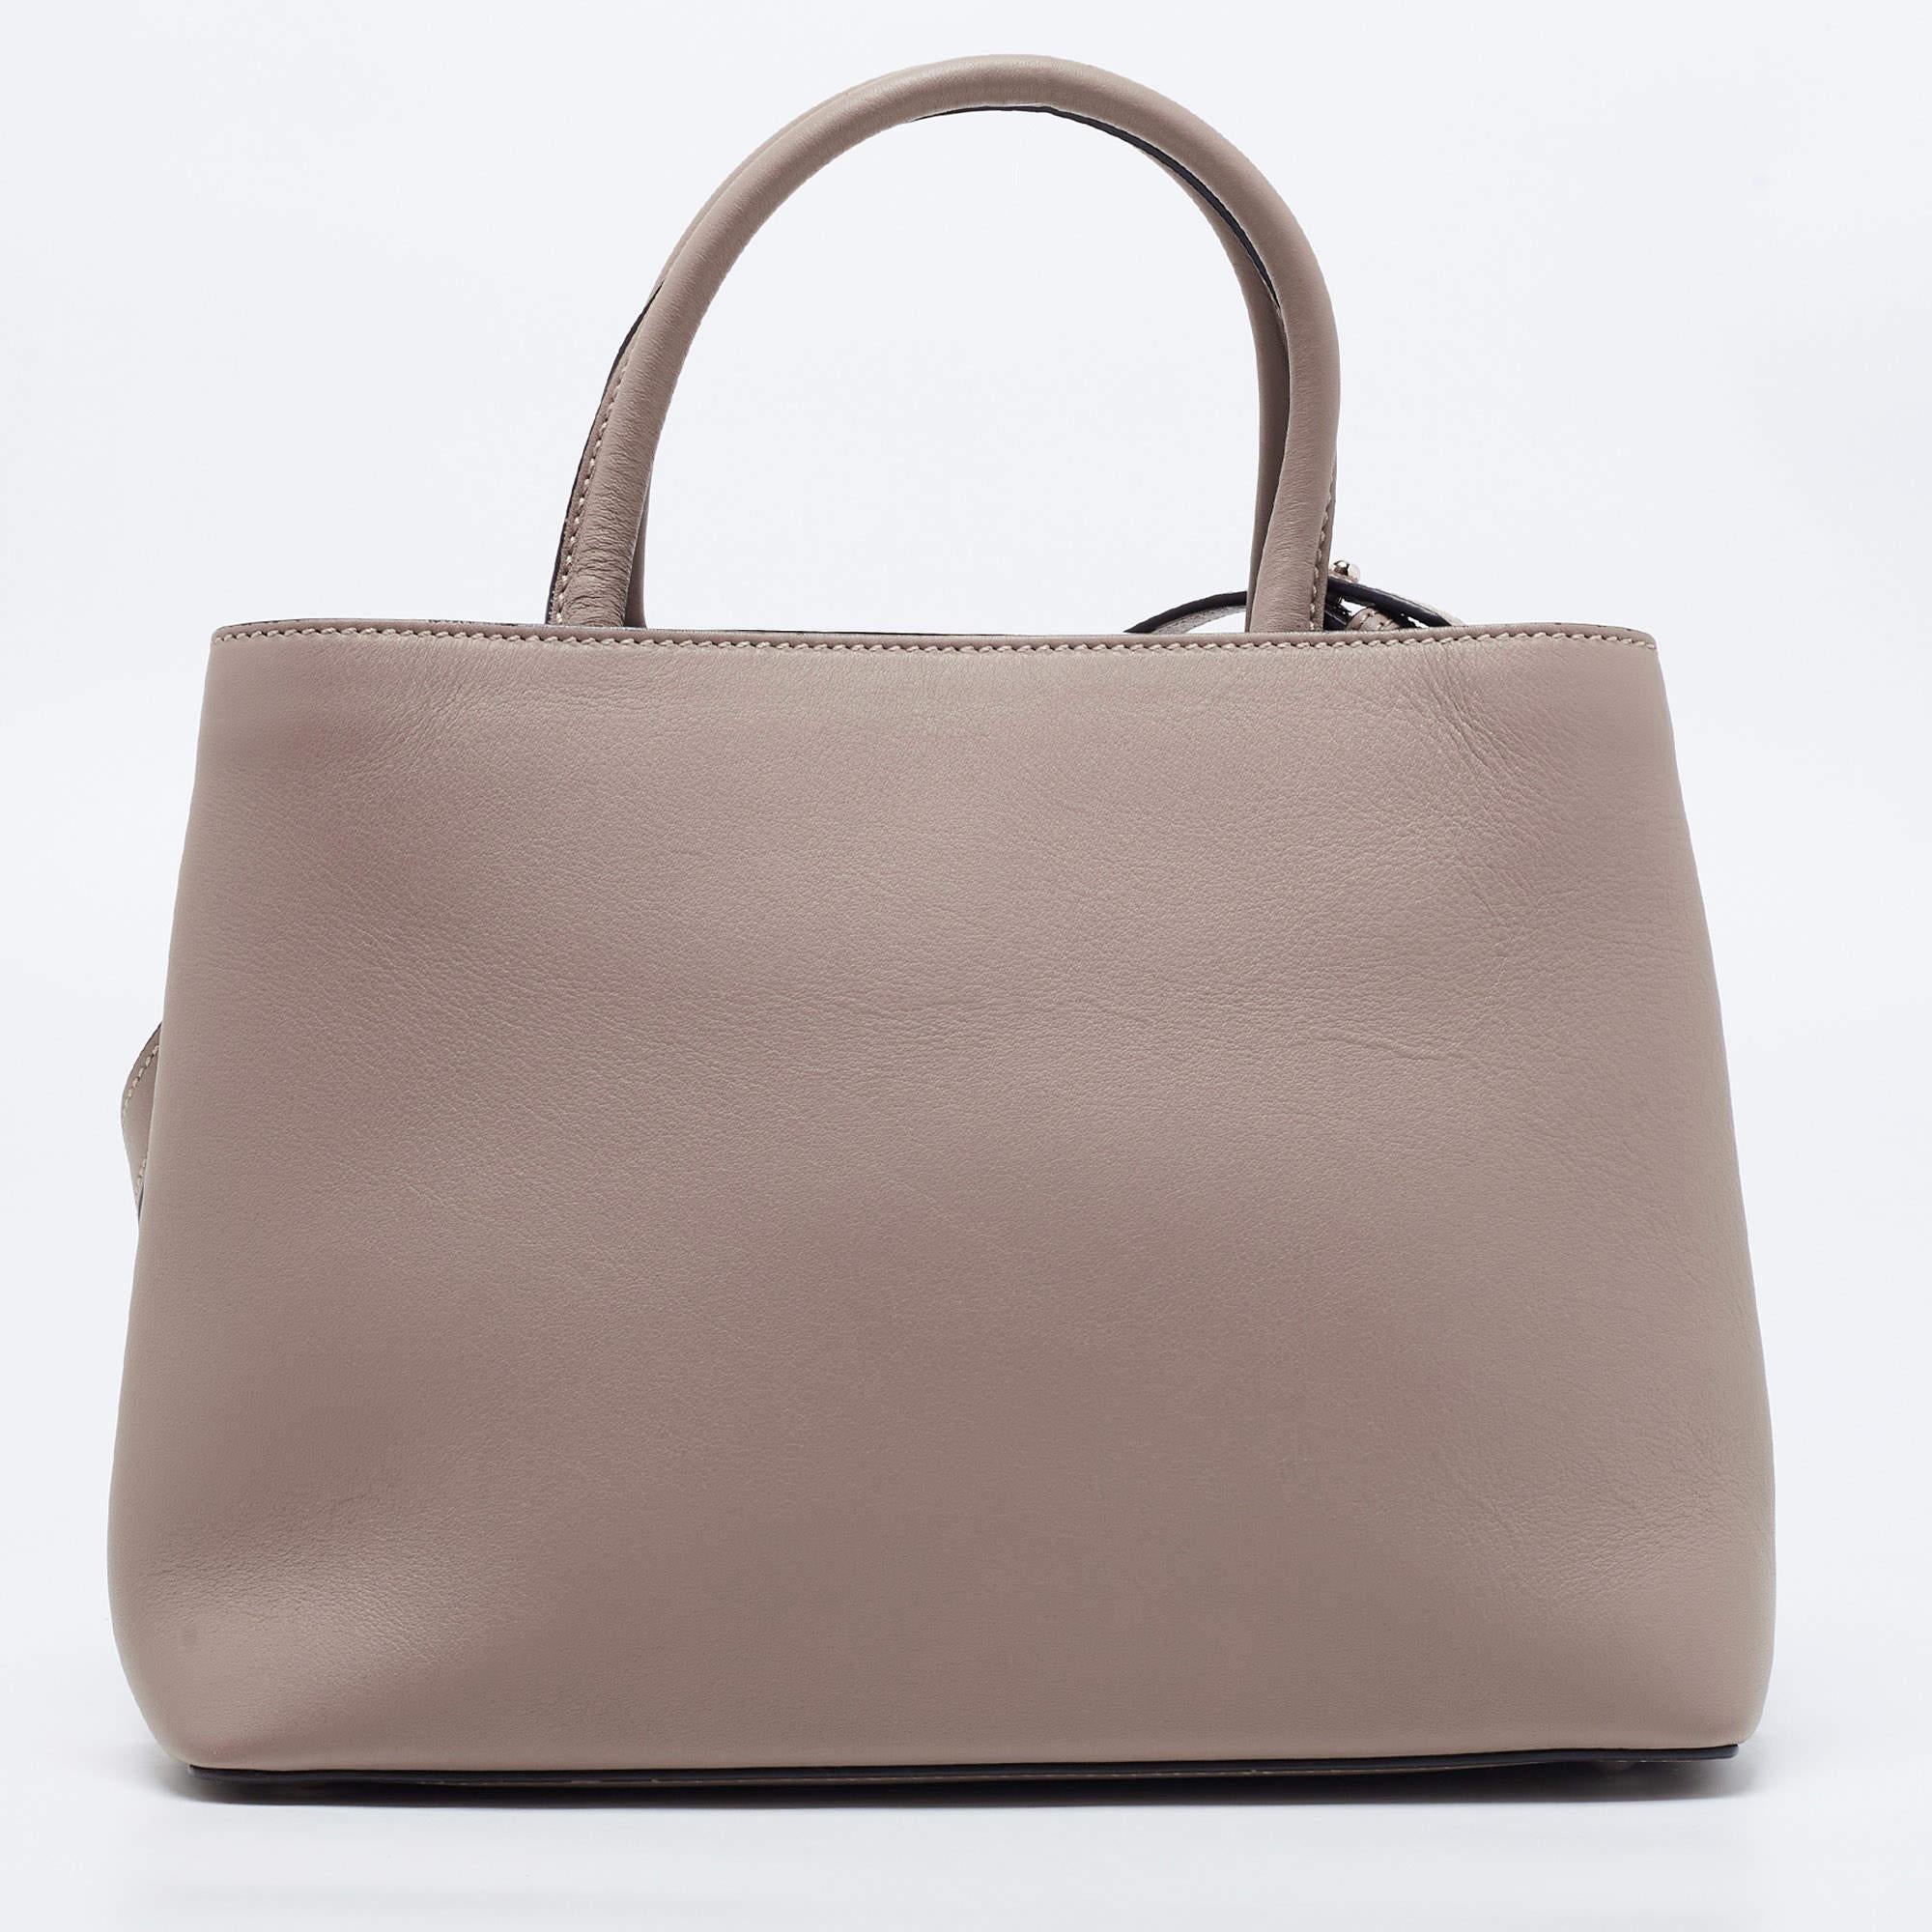 A classic handbag comes with the promise of enduring appeal, boosting your style time and again. This designer bag is one such creation. It’s a fine purchase.

Includes: Original Dustbag
